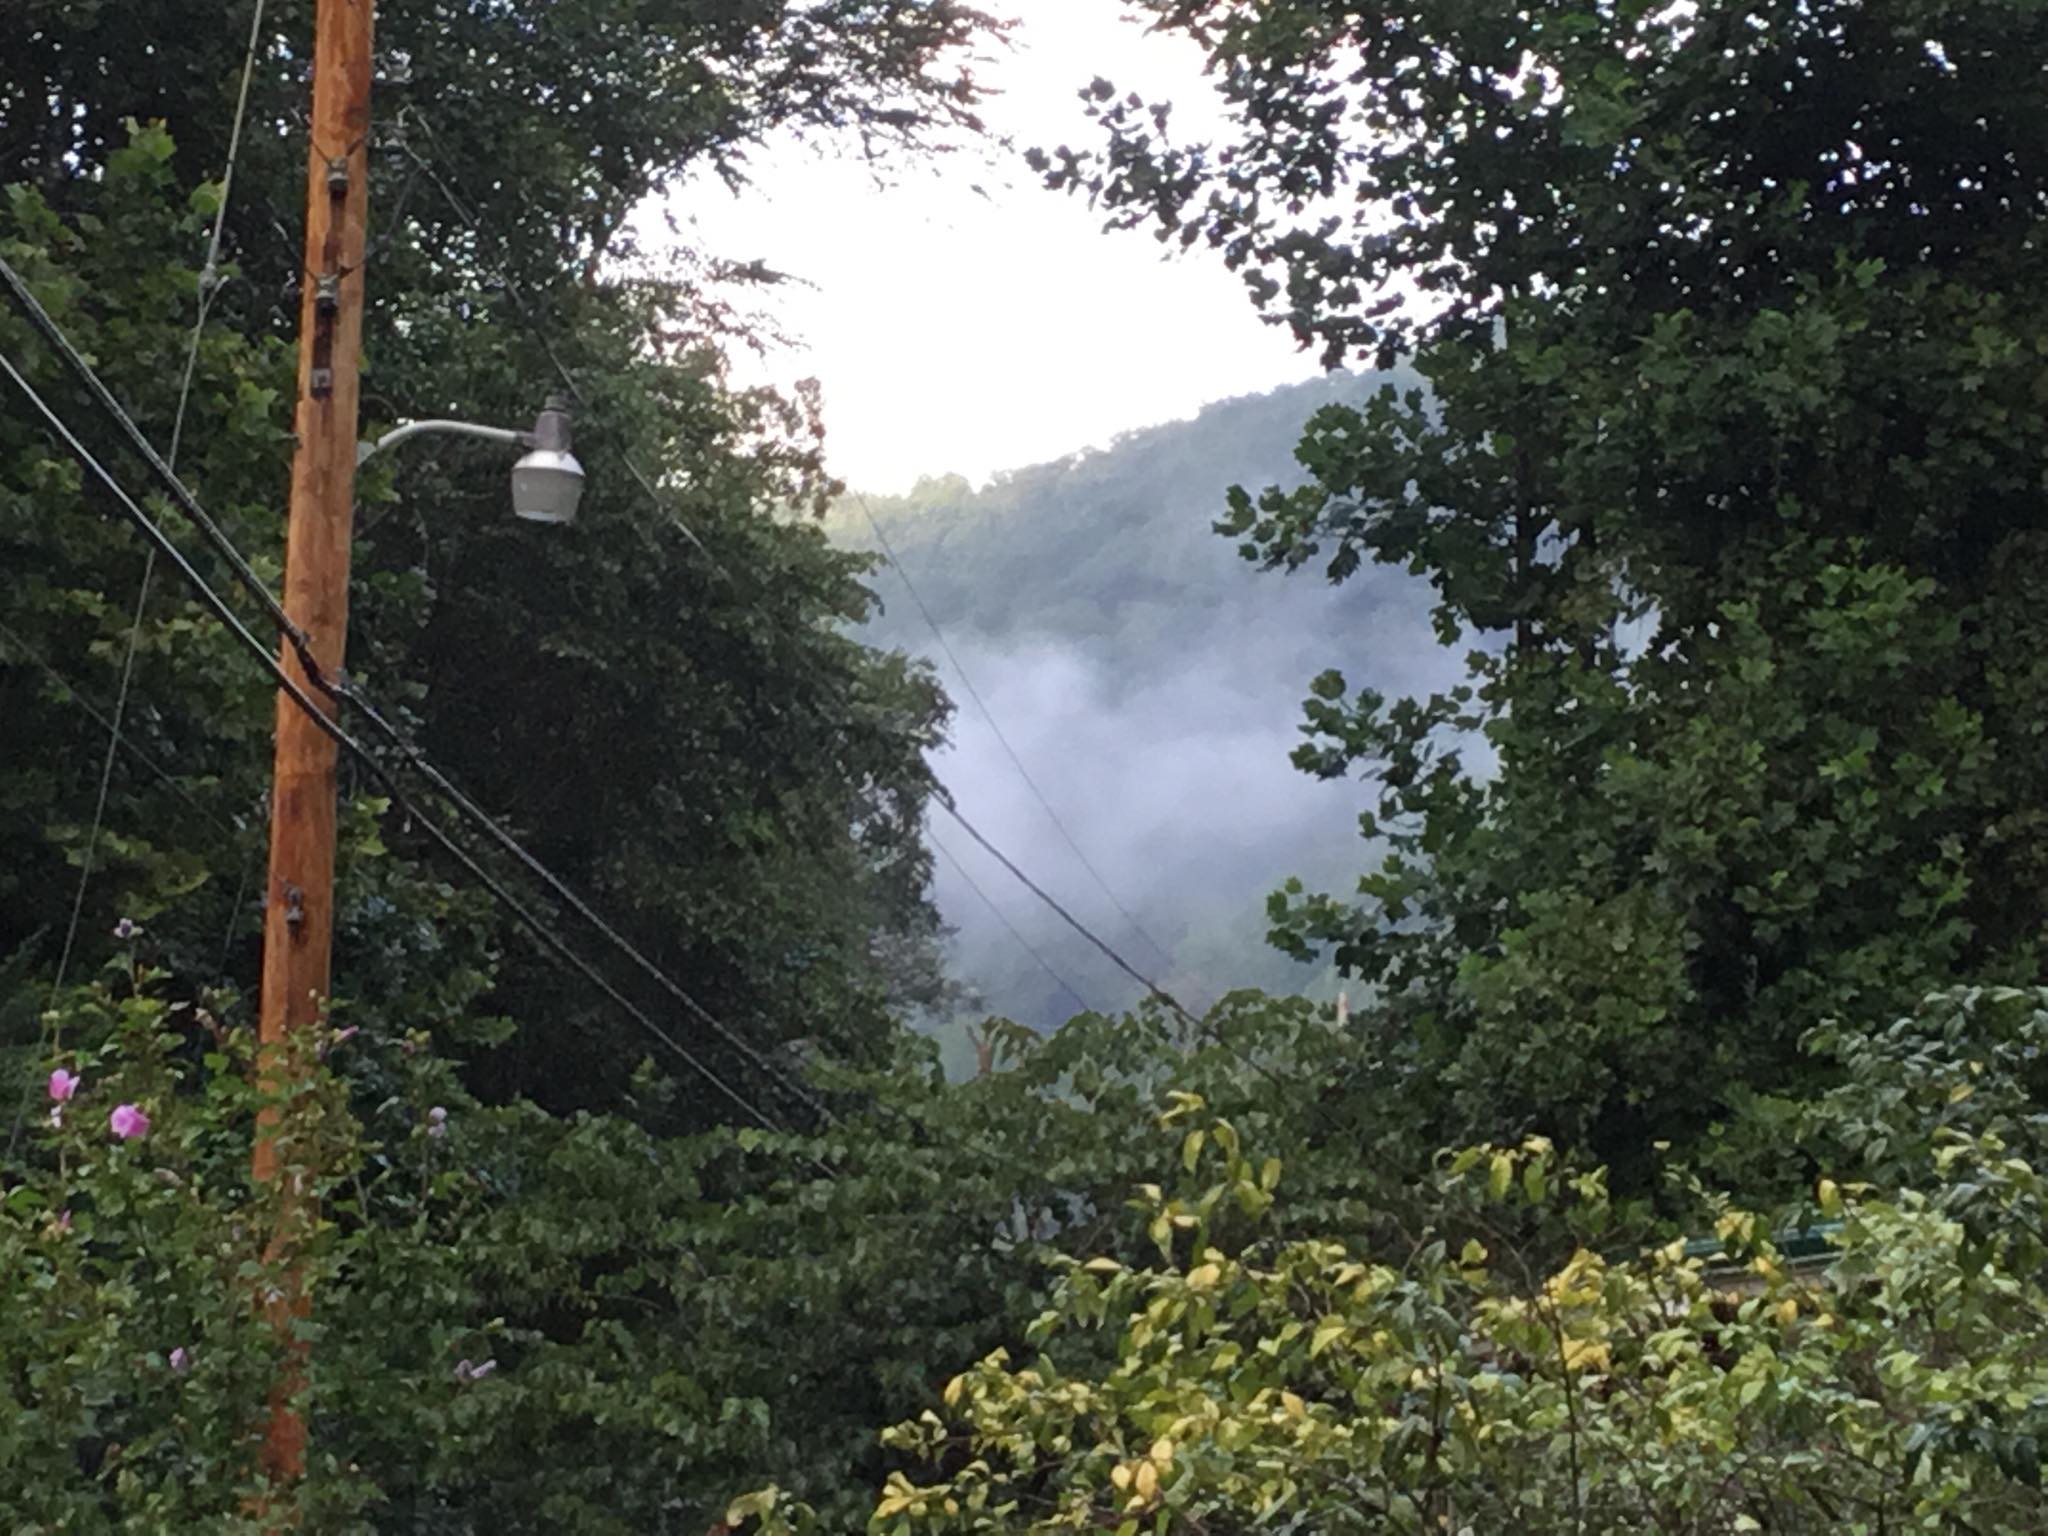 Clouds of coal mine dust intrude into the lives of residents of Eunice, West Virginia, as particulate matter from the nearby Black Eagle Deep Mine operated by Alpha Metallurgical Resources blows off the mine and into the community. Photo by Shelia Walk